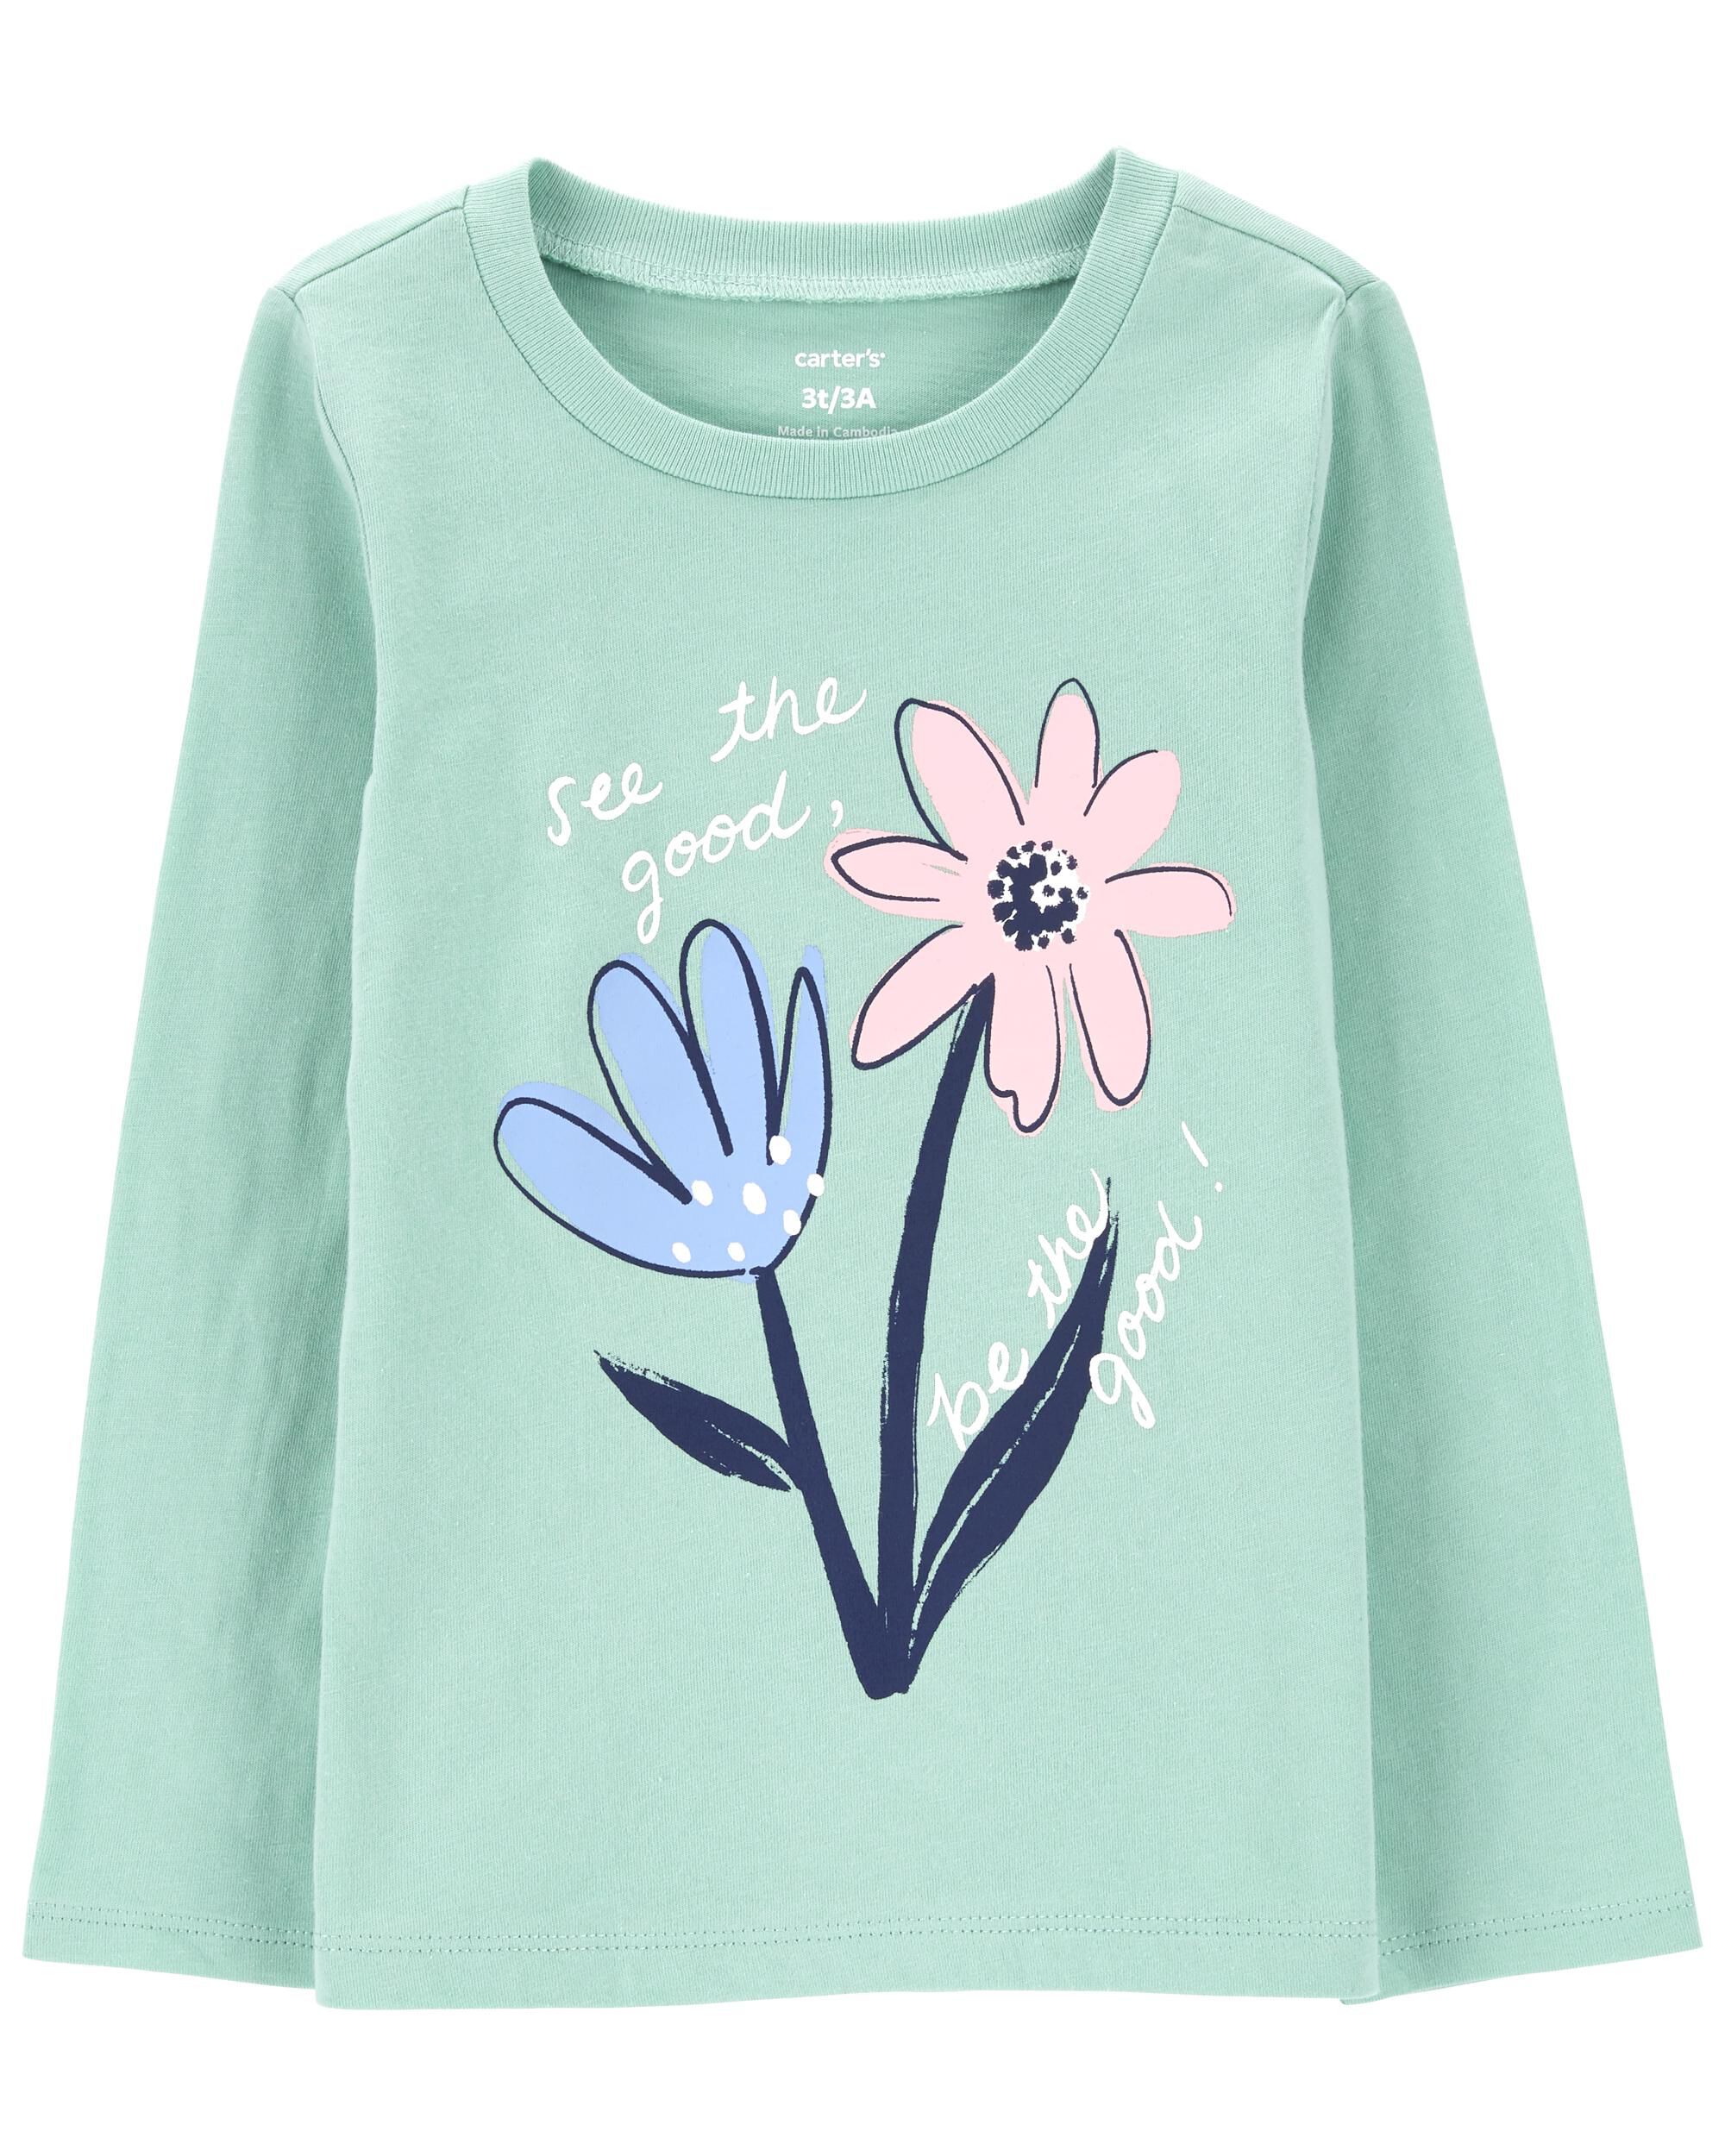 Carters Kid Floral Be The Good Jersey Tee